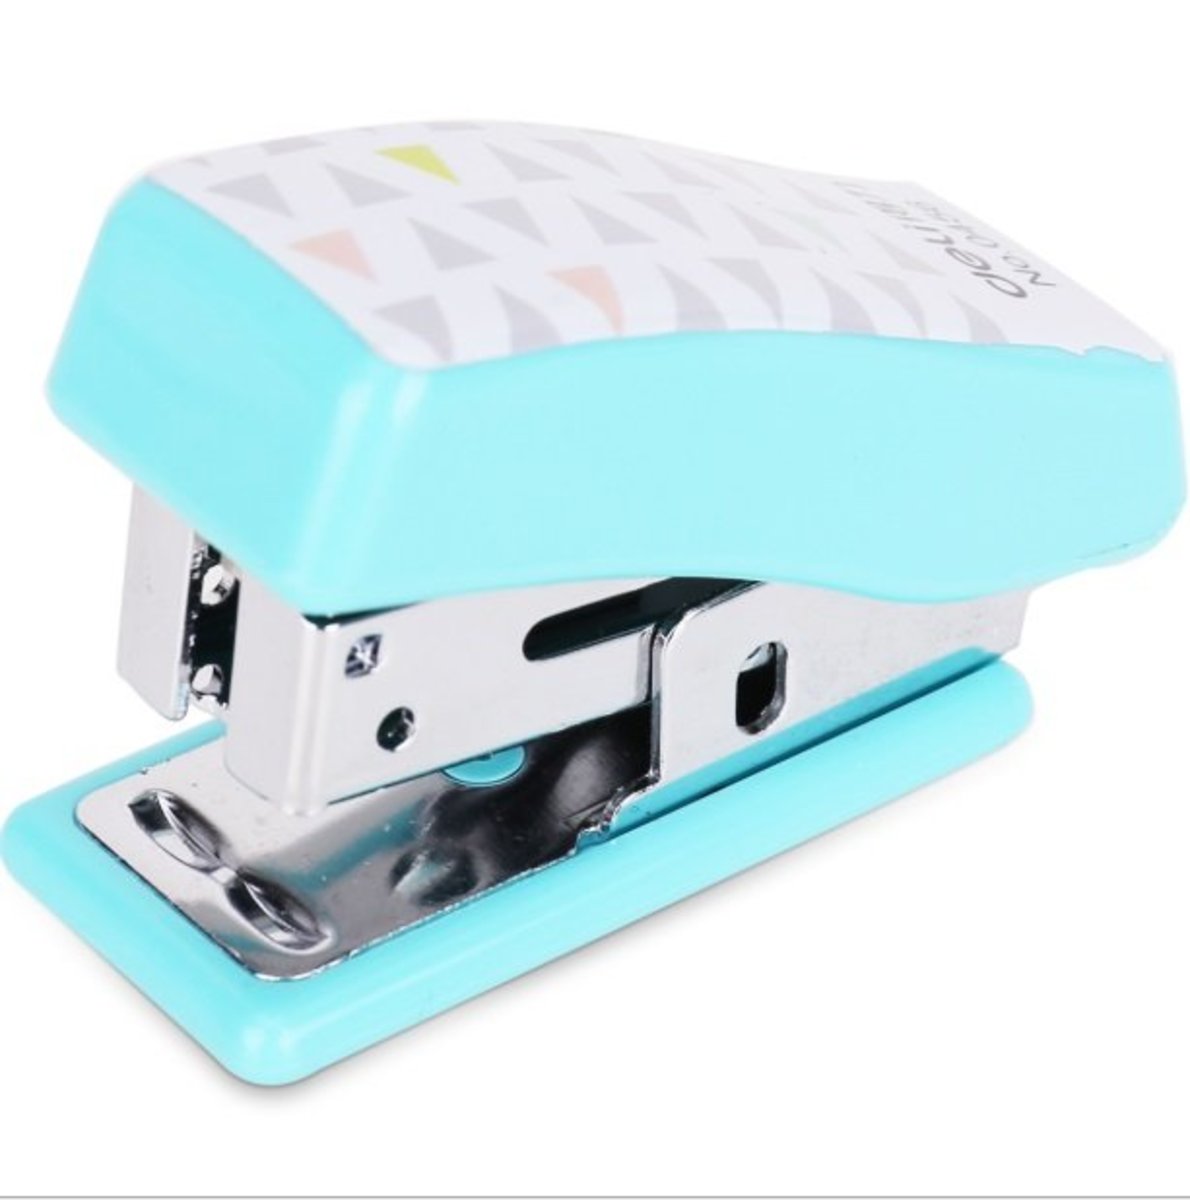 Deli stationery 0456 small stapler set with a box of staples (light blue) 52x26x36mm parallel goods